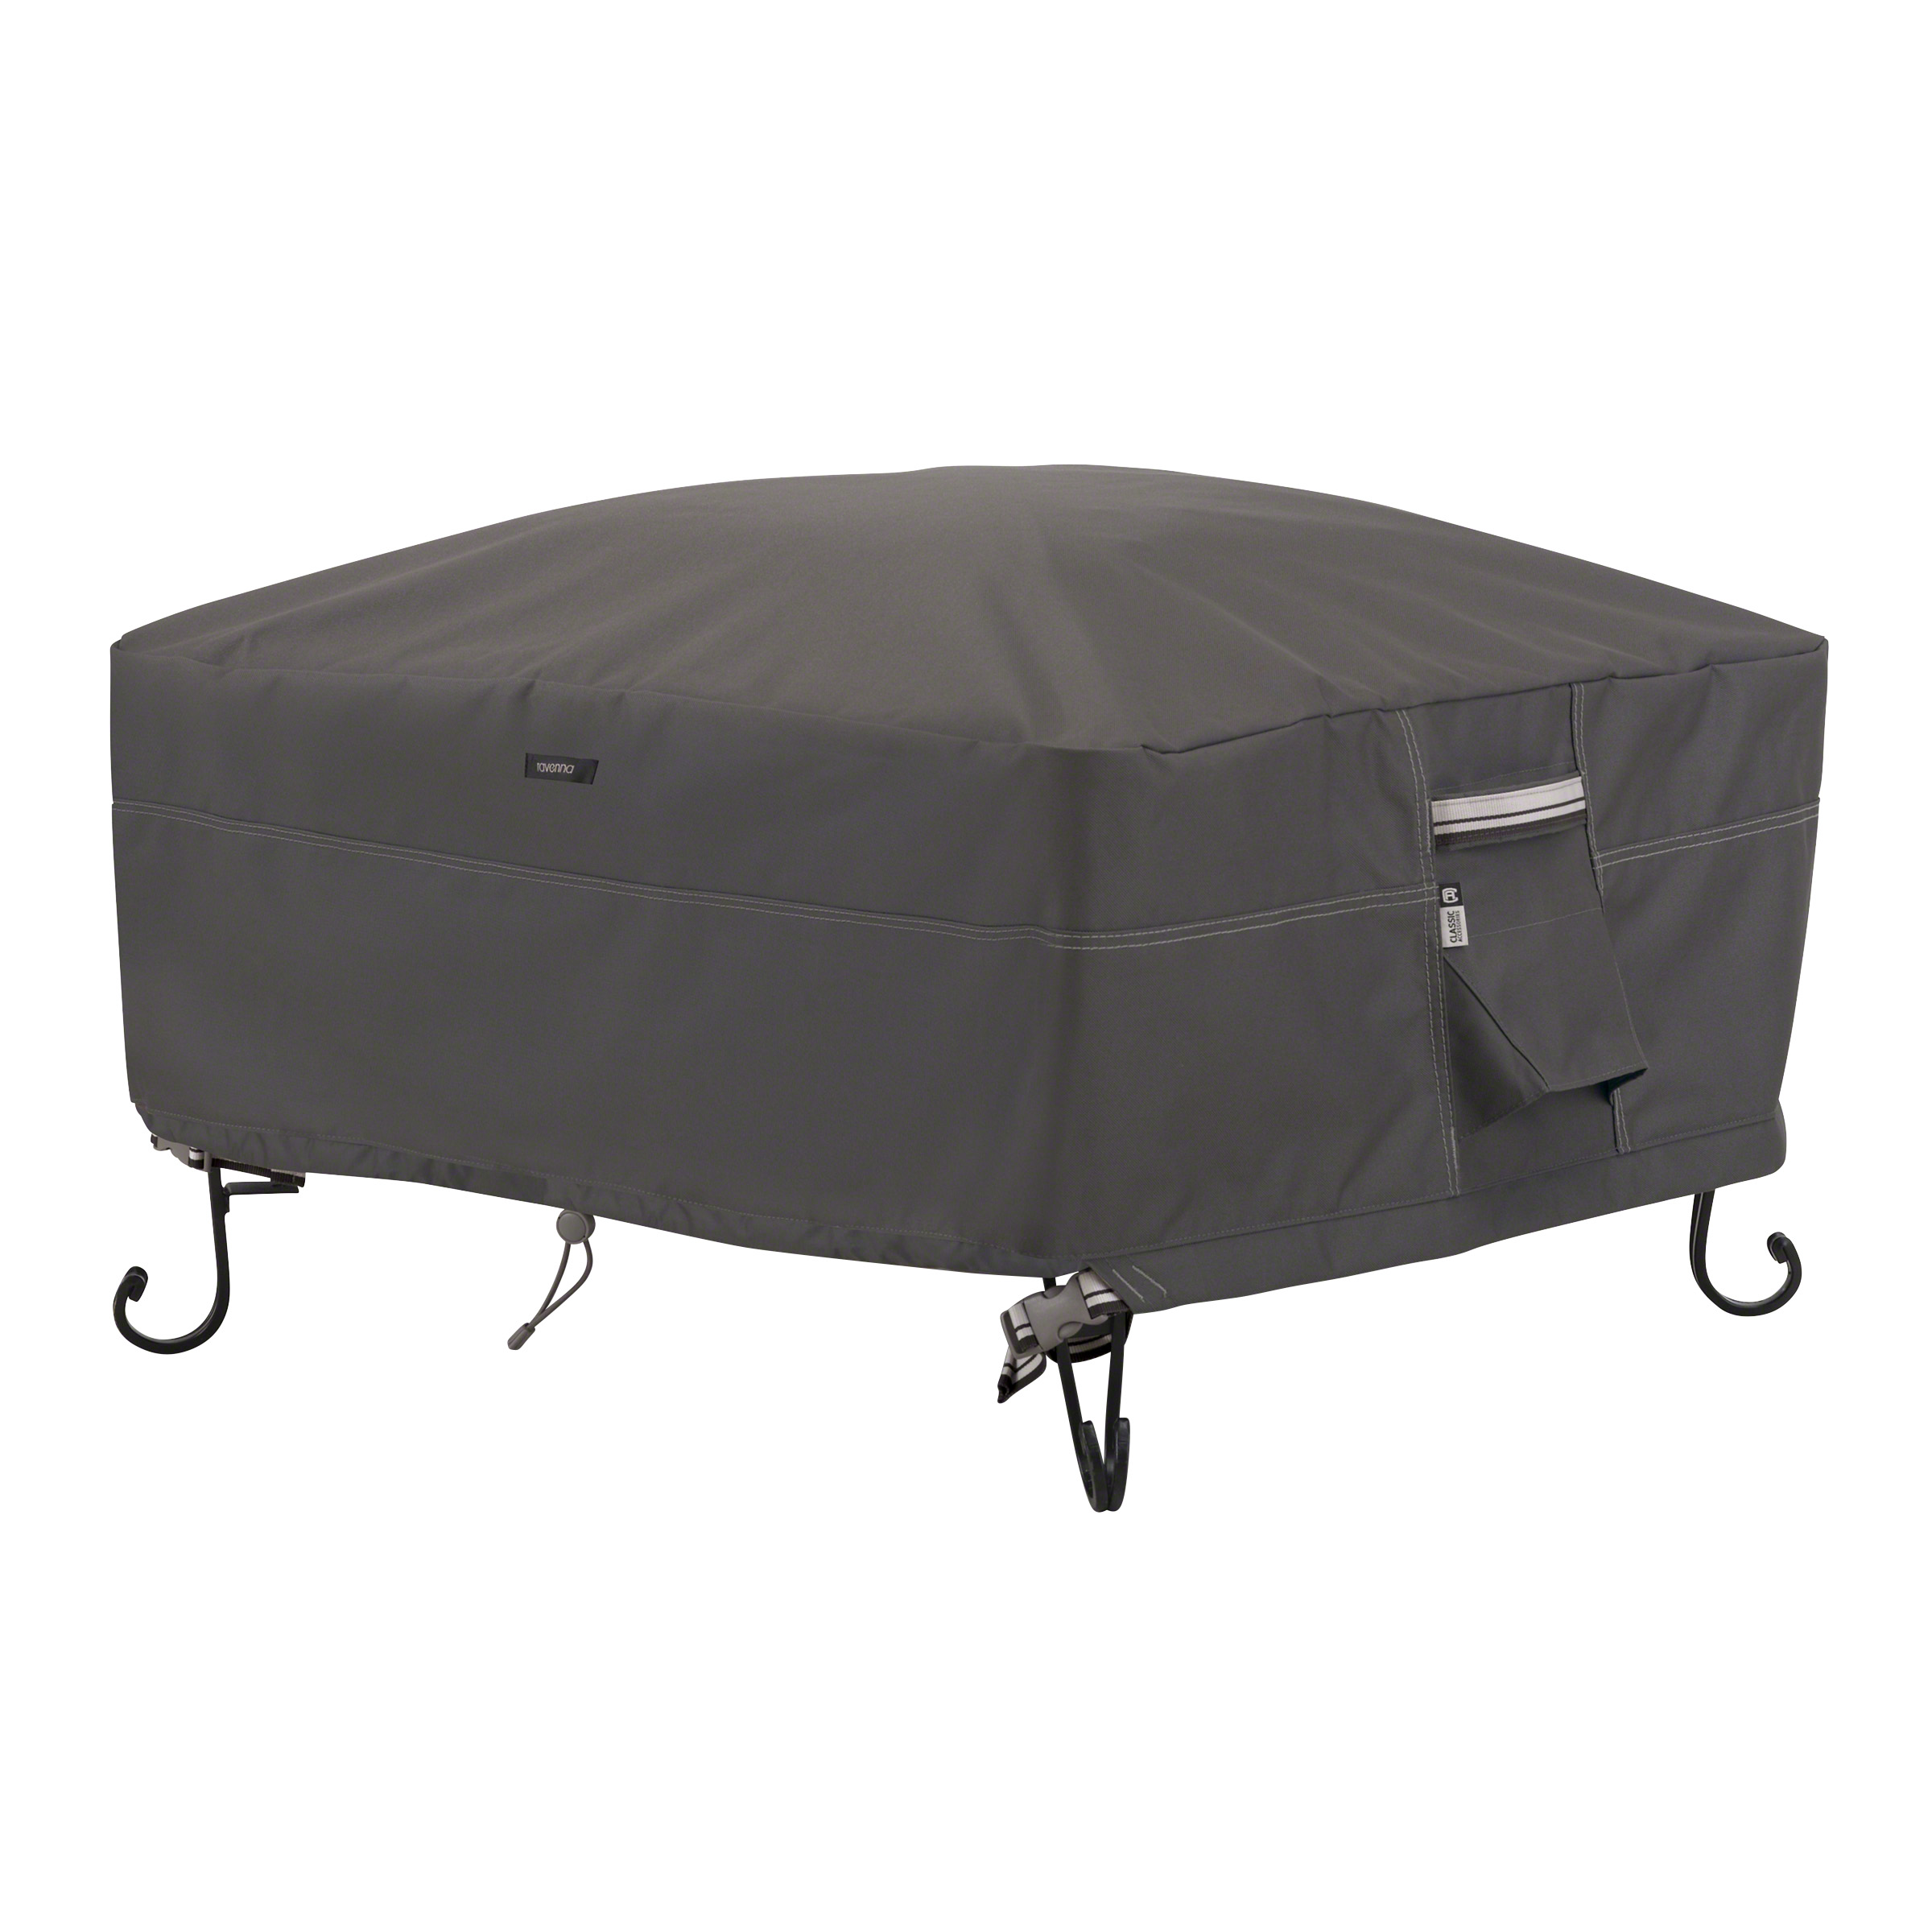 Classic Accessories Ravenna Full Coverage Fire Pit Patio Storage Cover - image 1 of 18